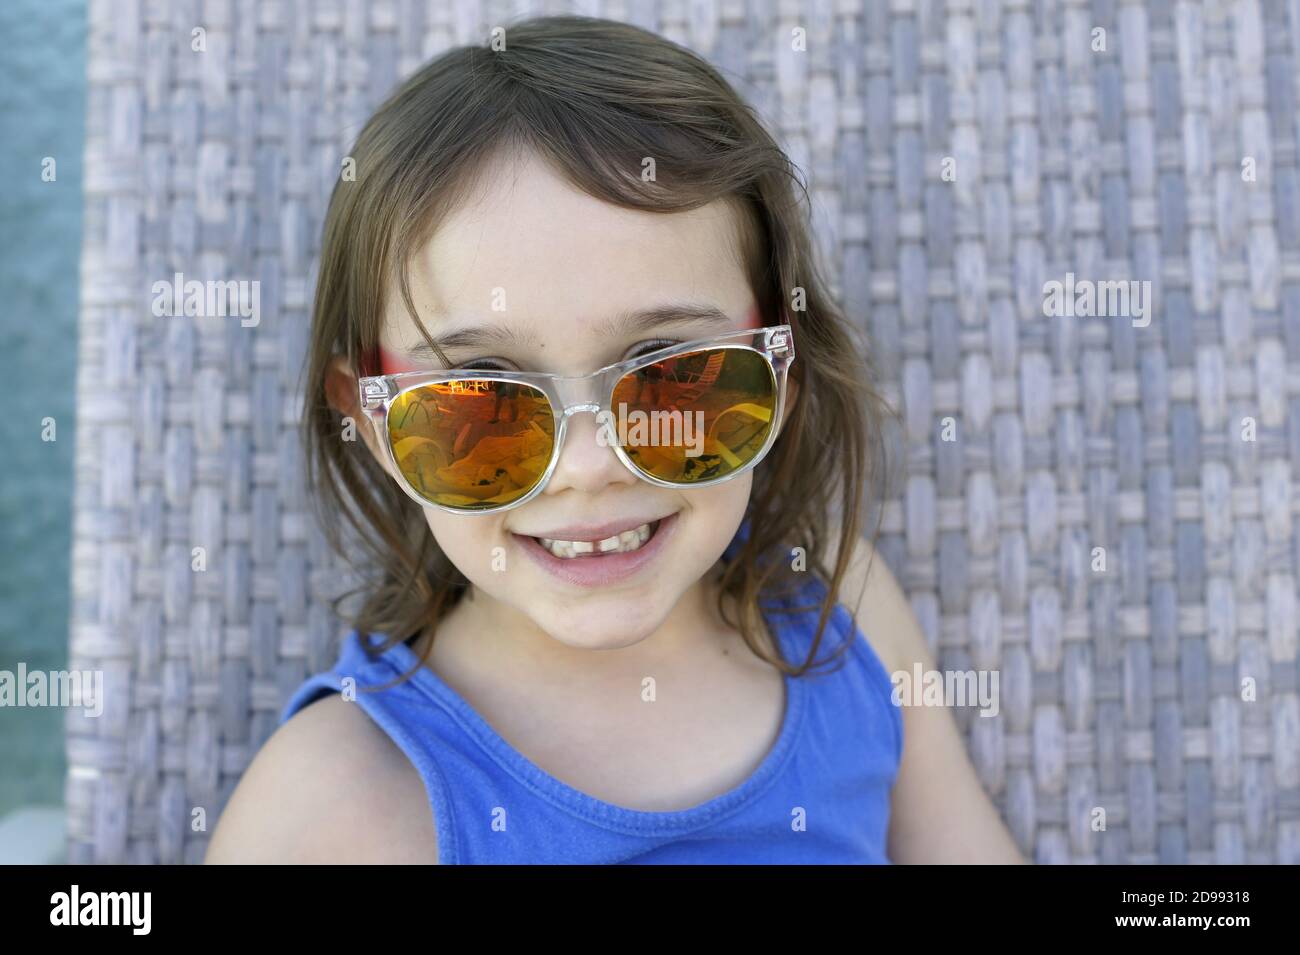 Beautiful little girl wearing sunglasses with defocused background Stock Photo